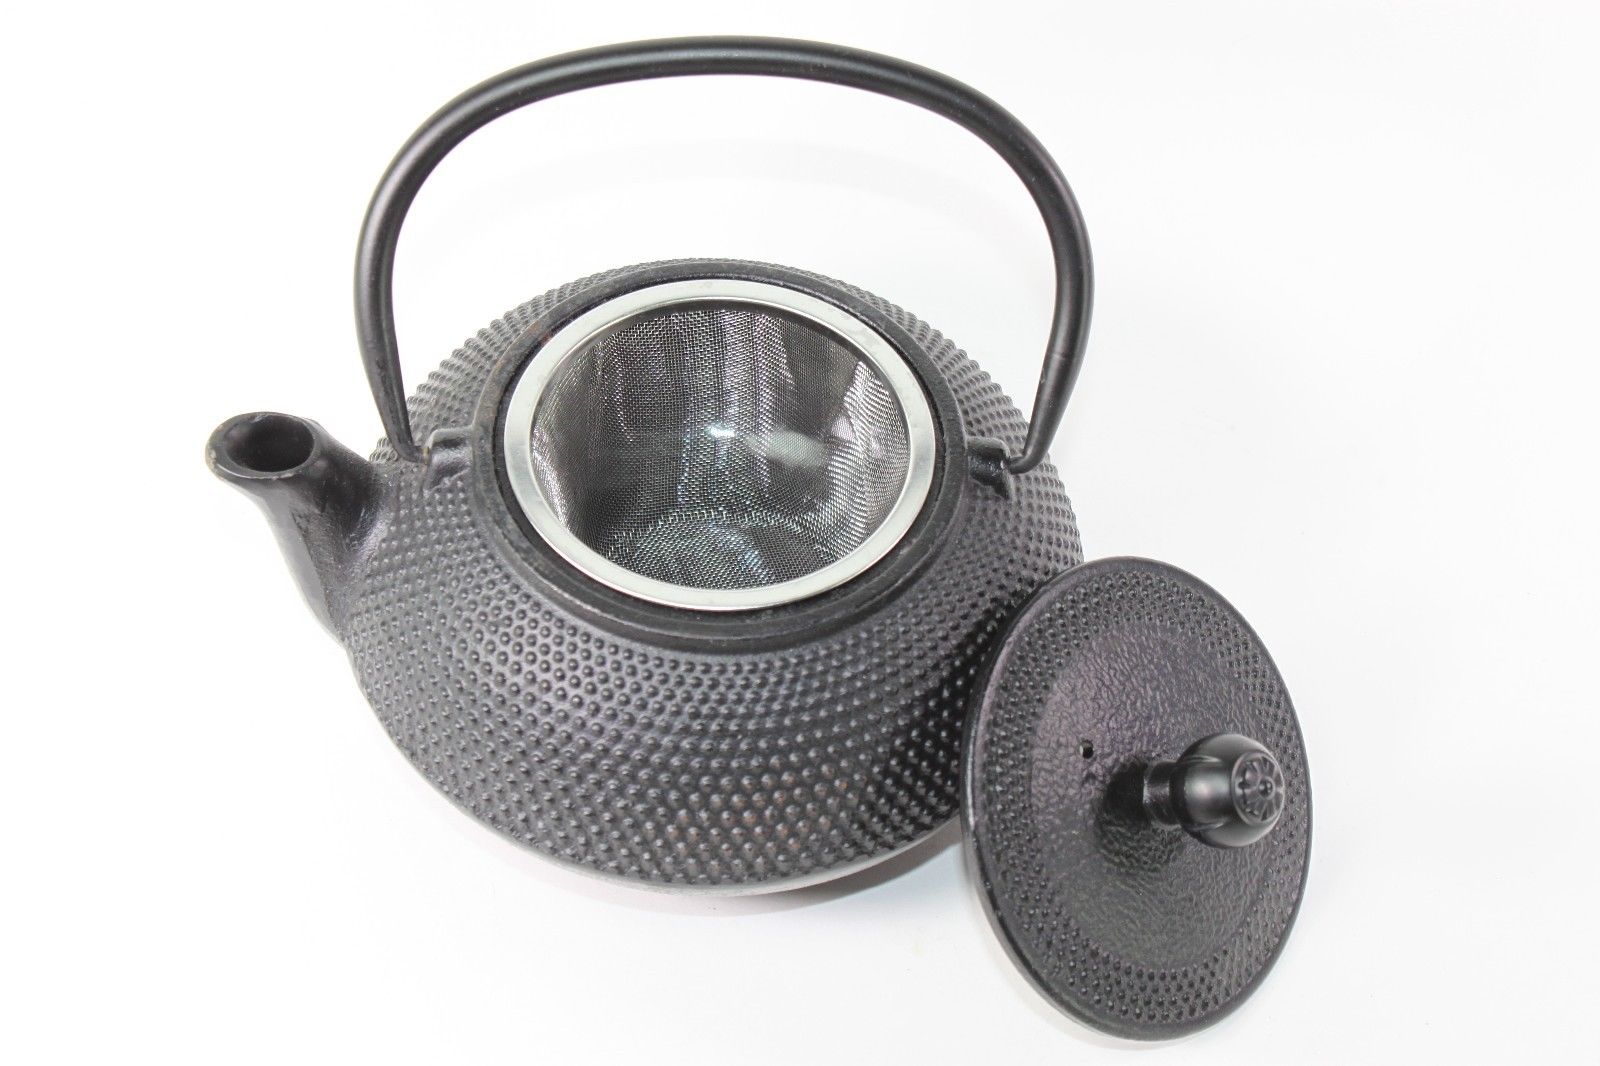 24 fl oz Black Small Dot Japanese Cast Iron Teapot Tetsubin with Infuser Filter - image 3 of 4